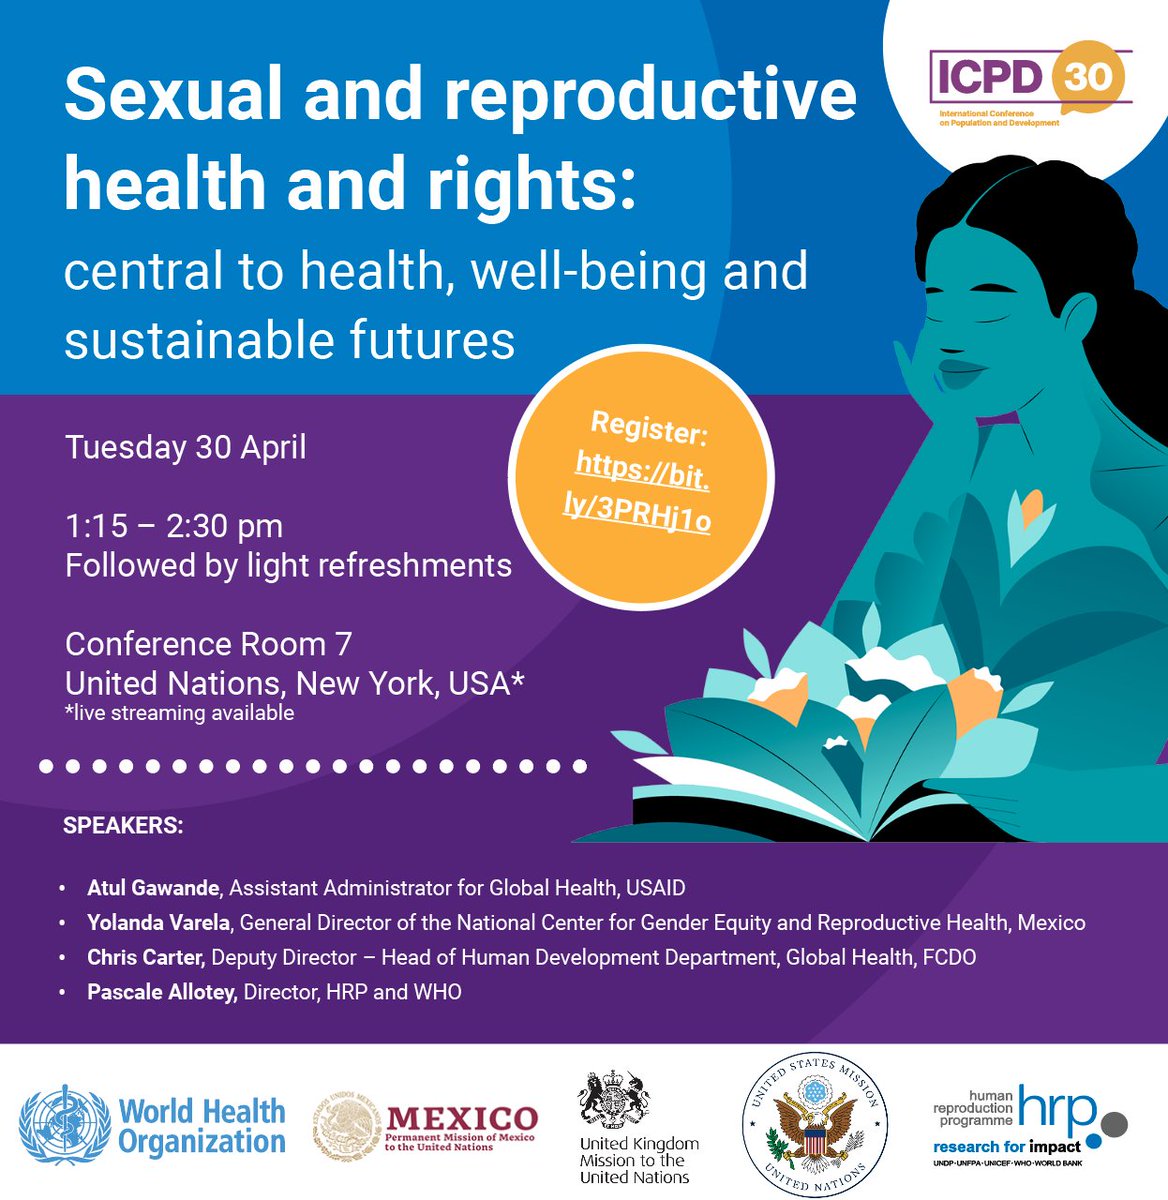 Join us for an #ICPD30 event!    

30 April at 1:15 PM EDT at the UN in NYC    

Sexual and reproductive health and rights: central to health, well-being and sustainable futures    

Register to attend: bit.ly/3PRHj1o